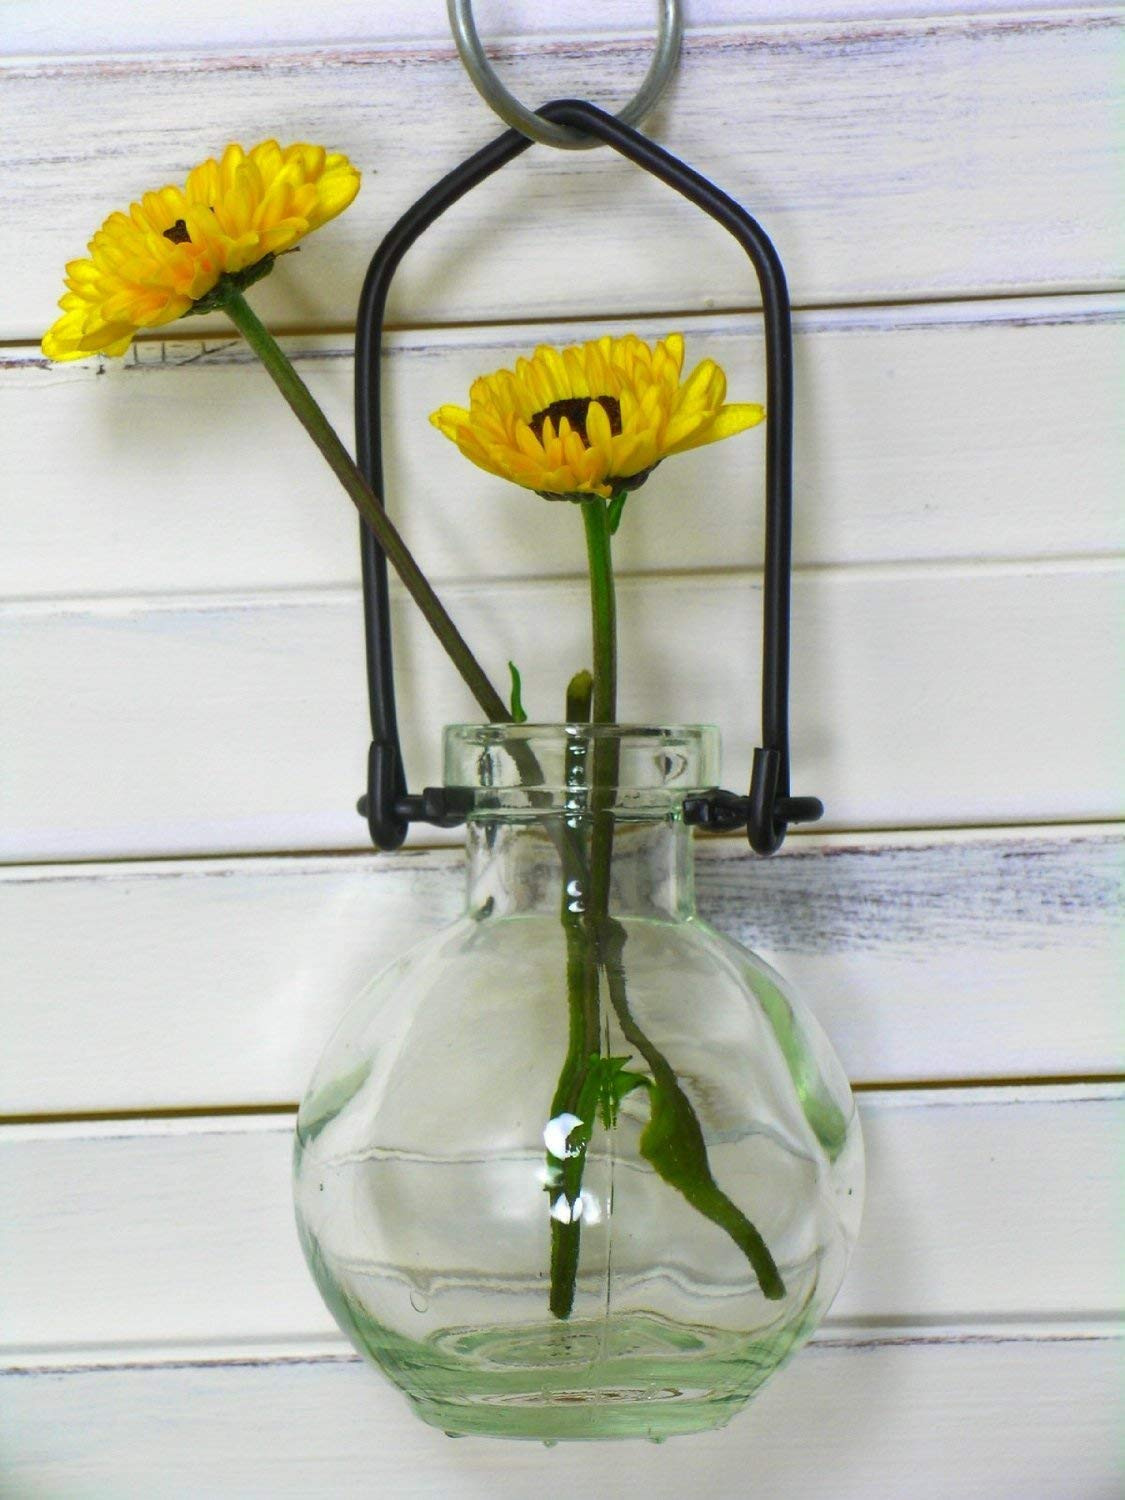 green glass vases for sale of amazon com hanging flowers colored glass vase g70 clear 1 pc in amazon com hanging flowers colored glass vase g70 clear 1 pc colored glass bottle floral vase colored vase bud vase wall vase garden vase